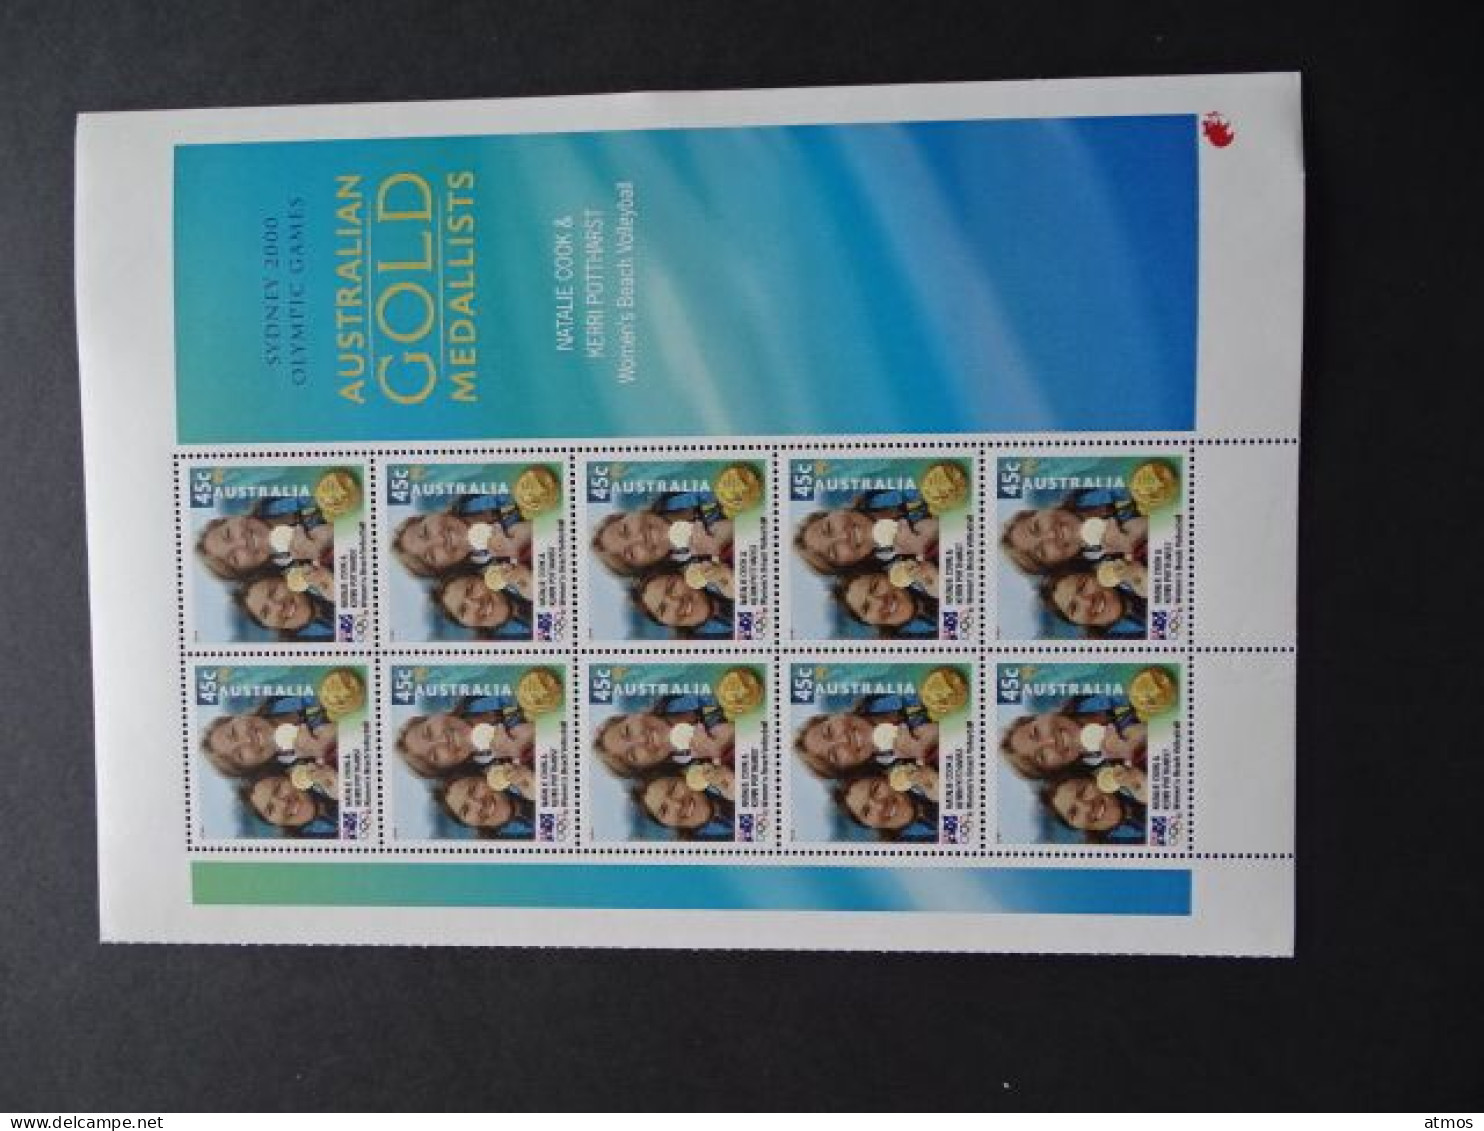 Australia MNH Michel Nr 1983 Sheet Of 10 From 2000 QLD - Mint Stamps